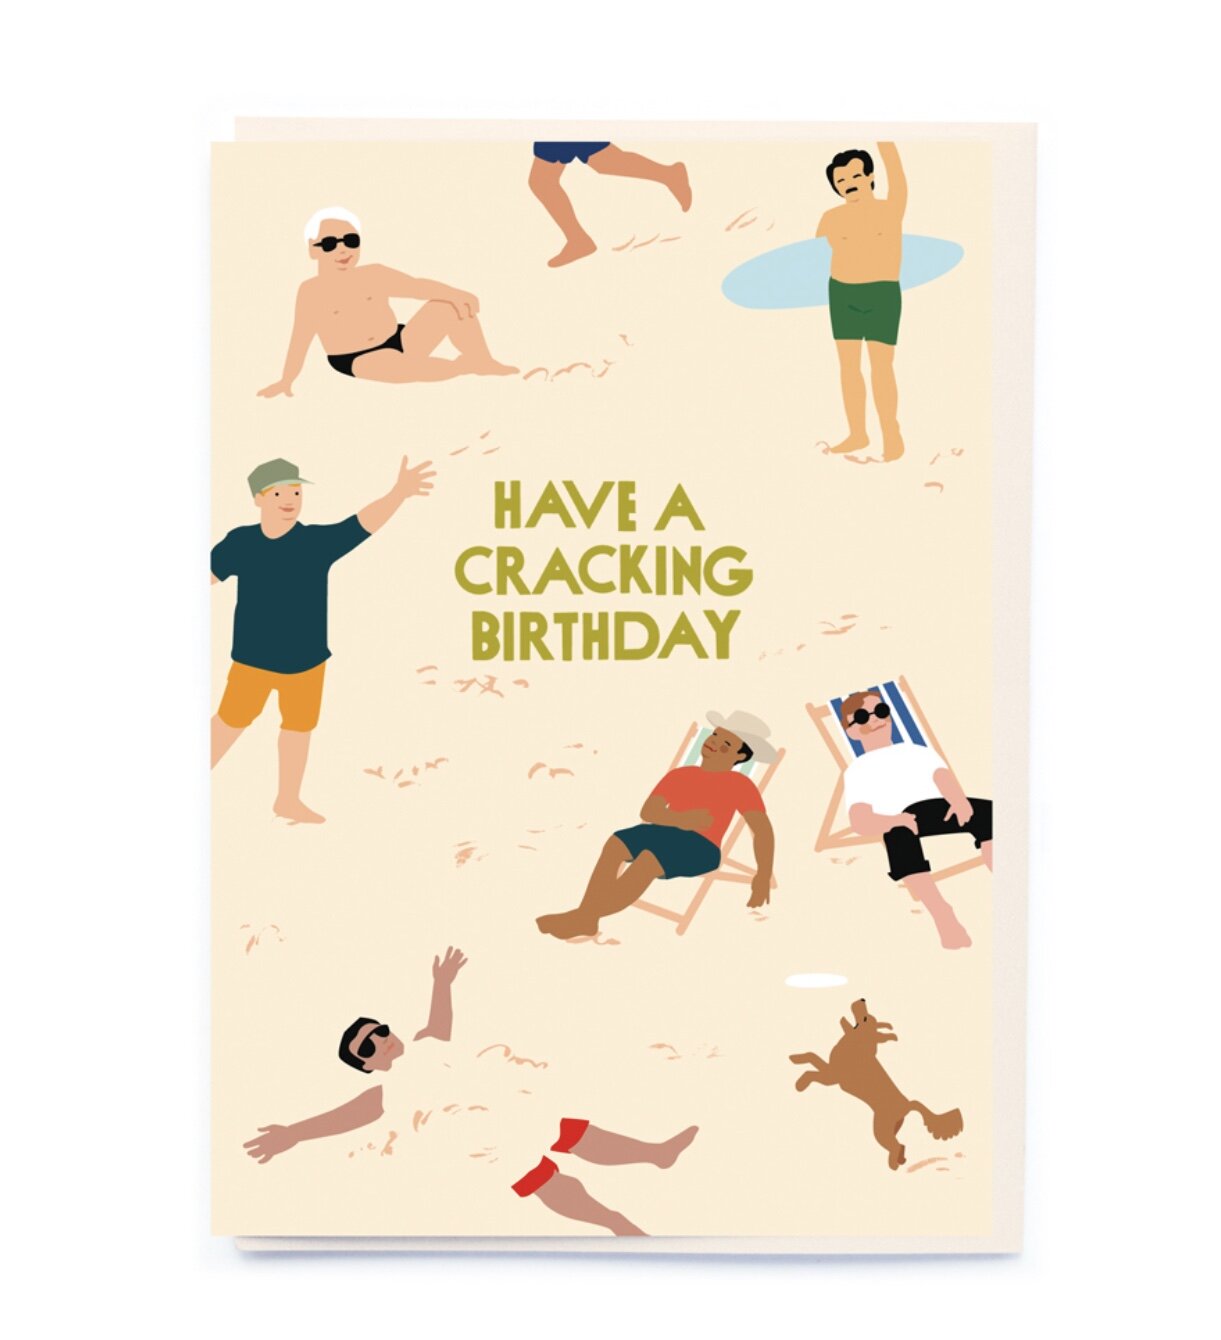 HAVE A CRACKING BIRTHDAY | CARD BY NOI